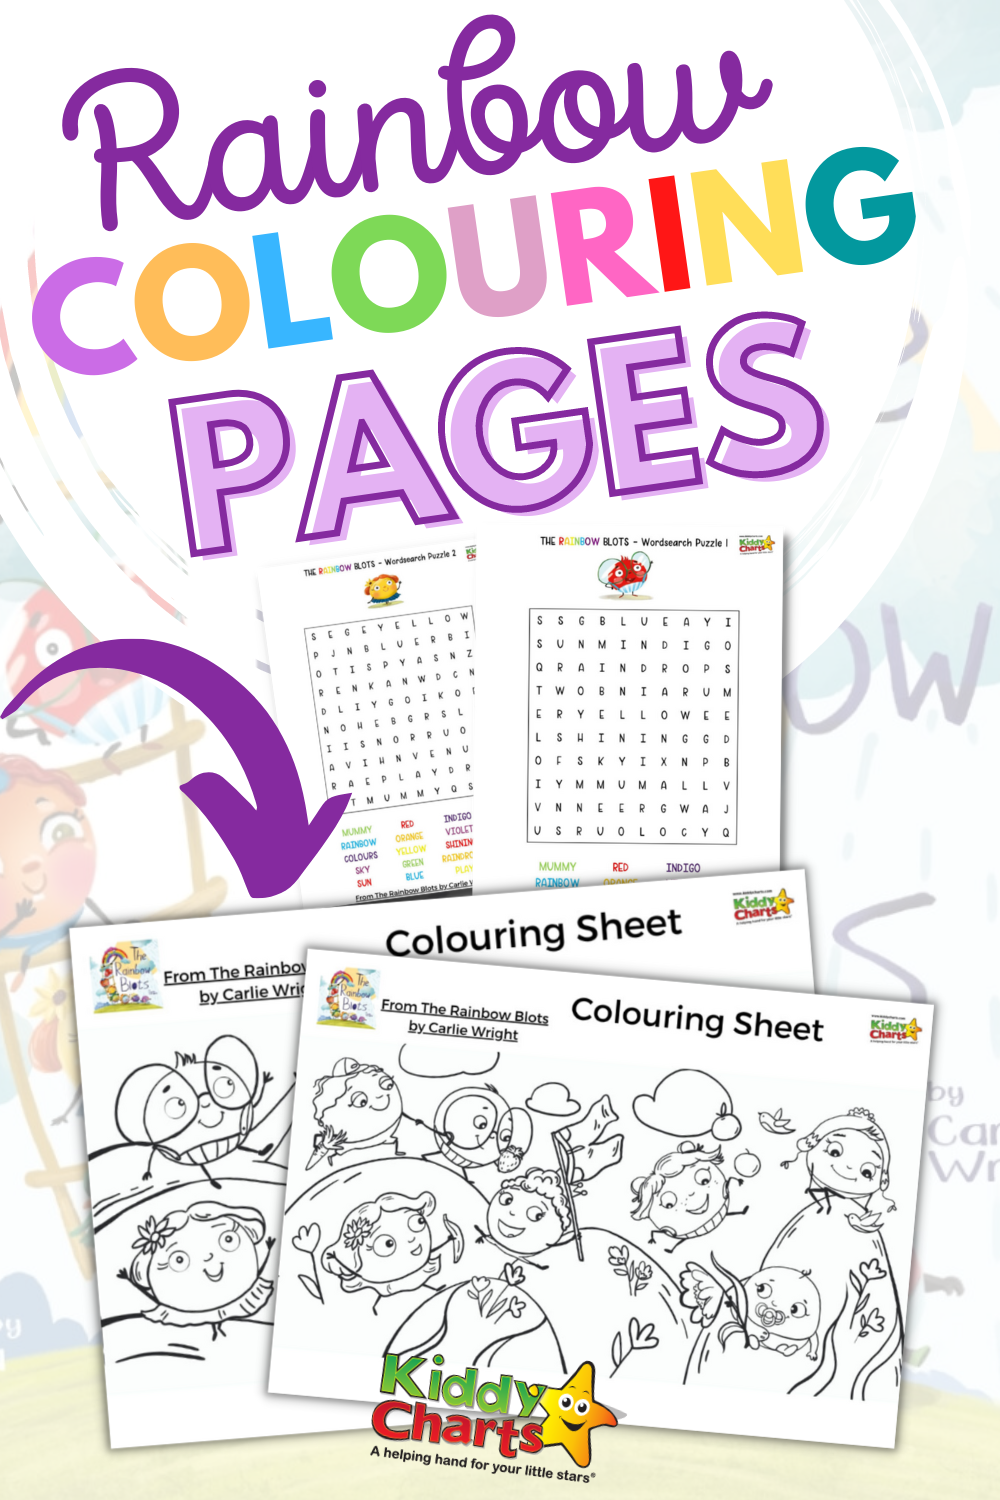 Rainbow Colouring Pages - Blots Activity Pack - kiddycharts.com